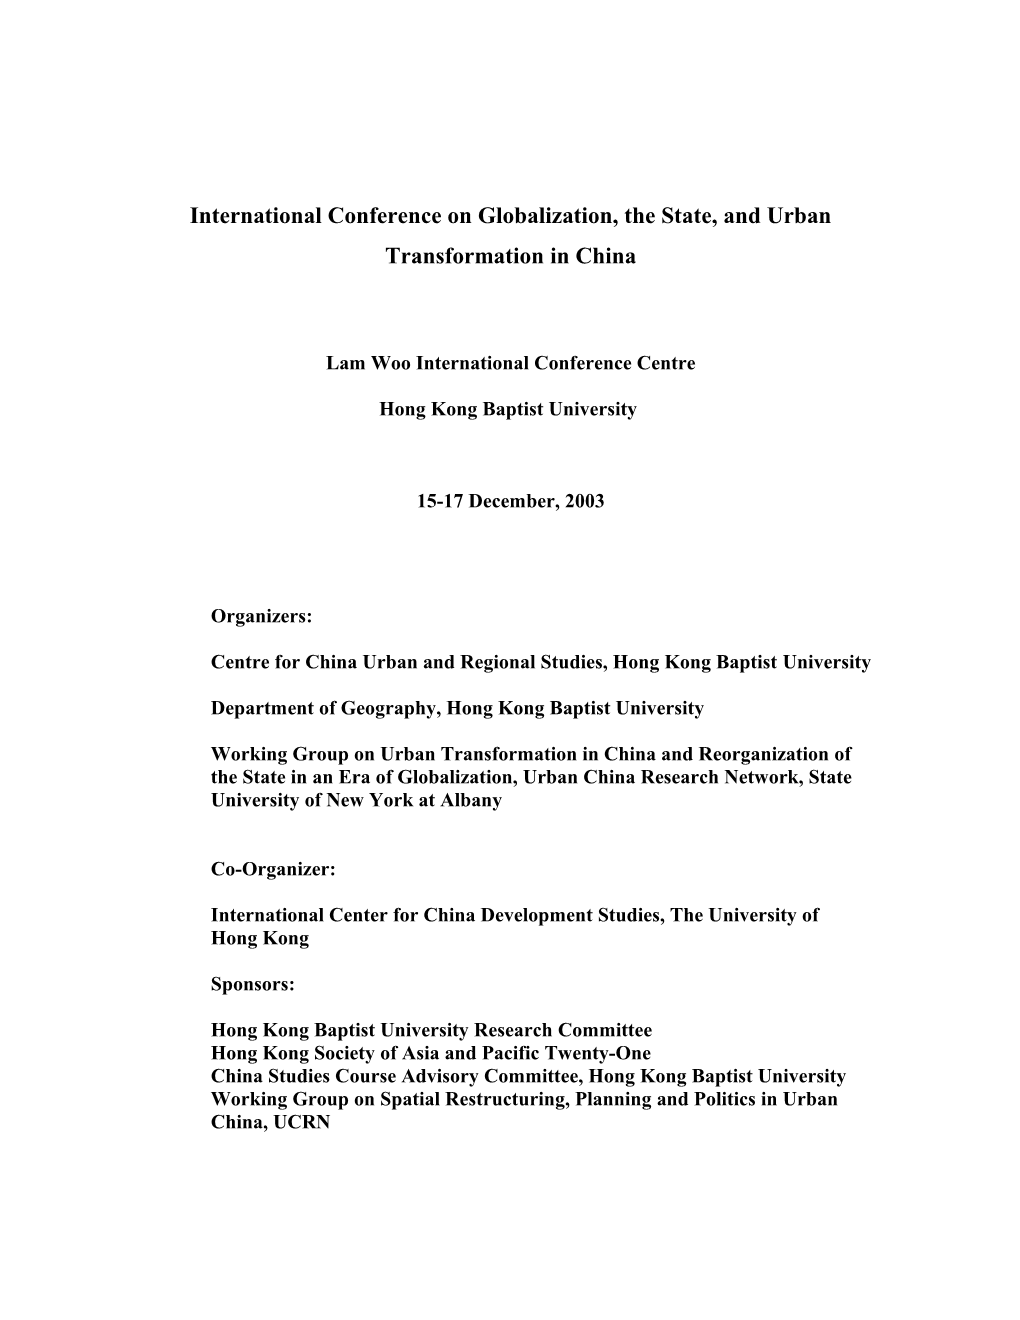 International Conference on Globalization, the State, and Urban Transformation in China